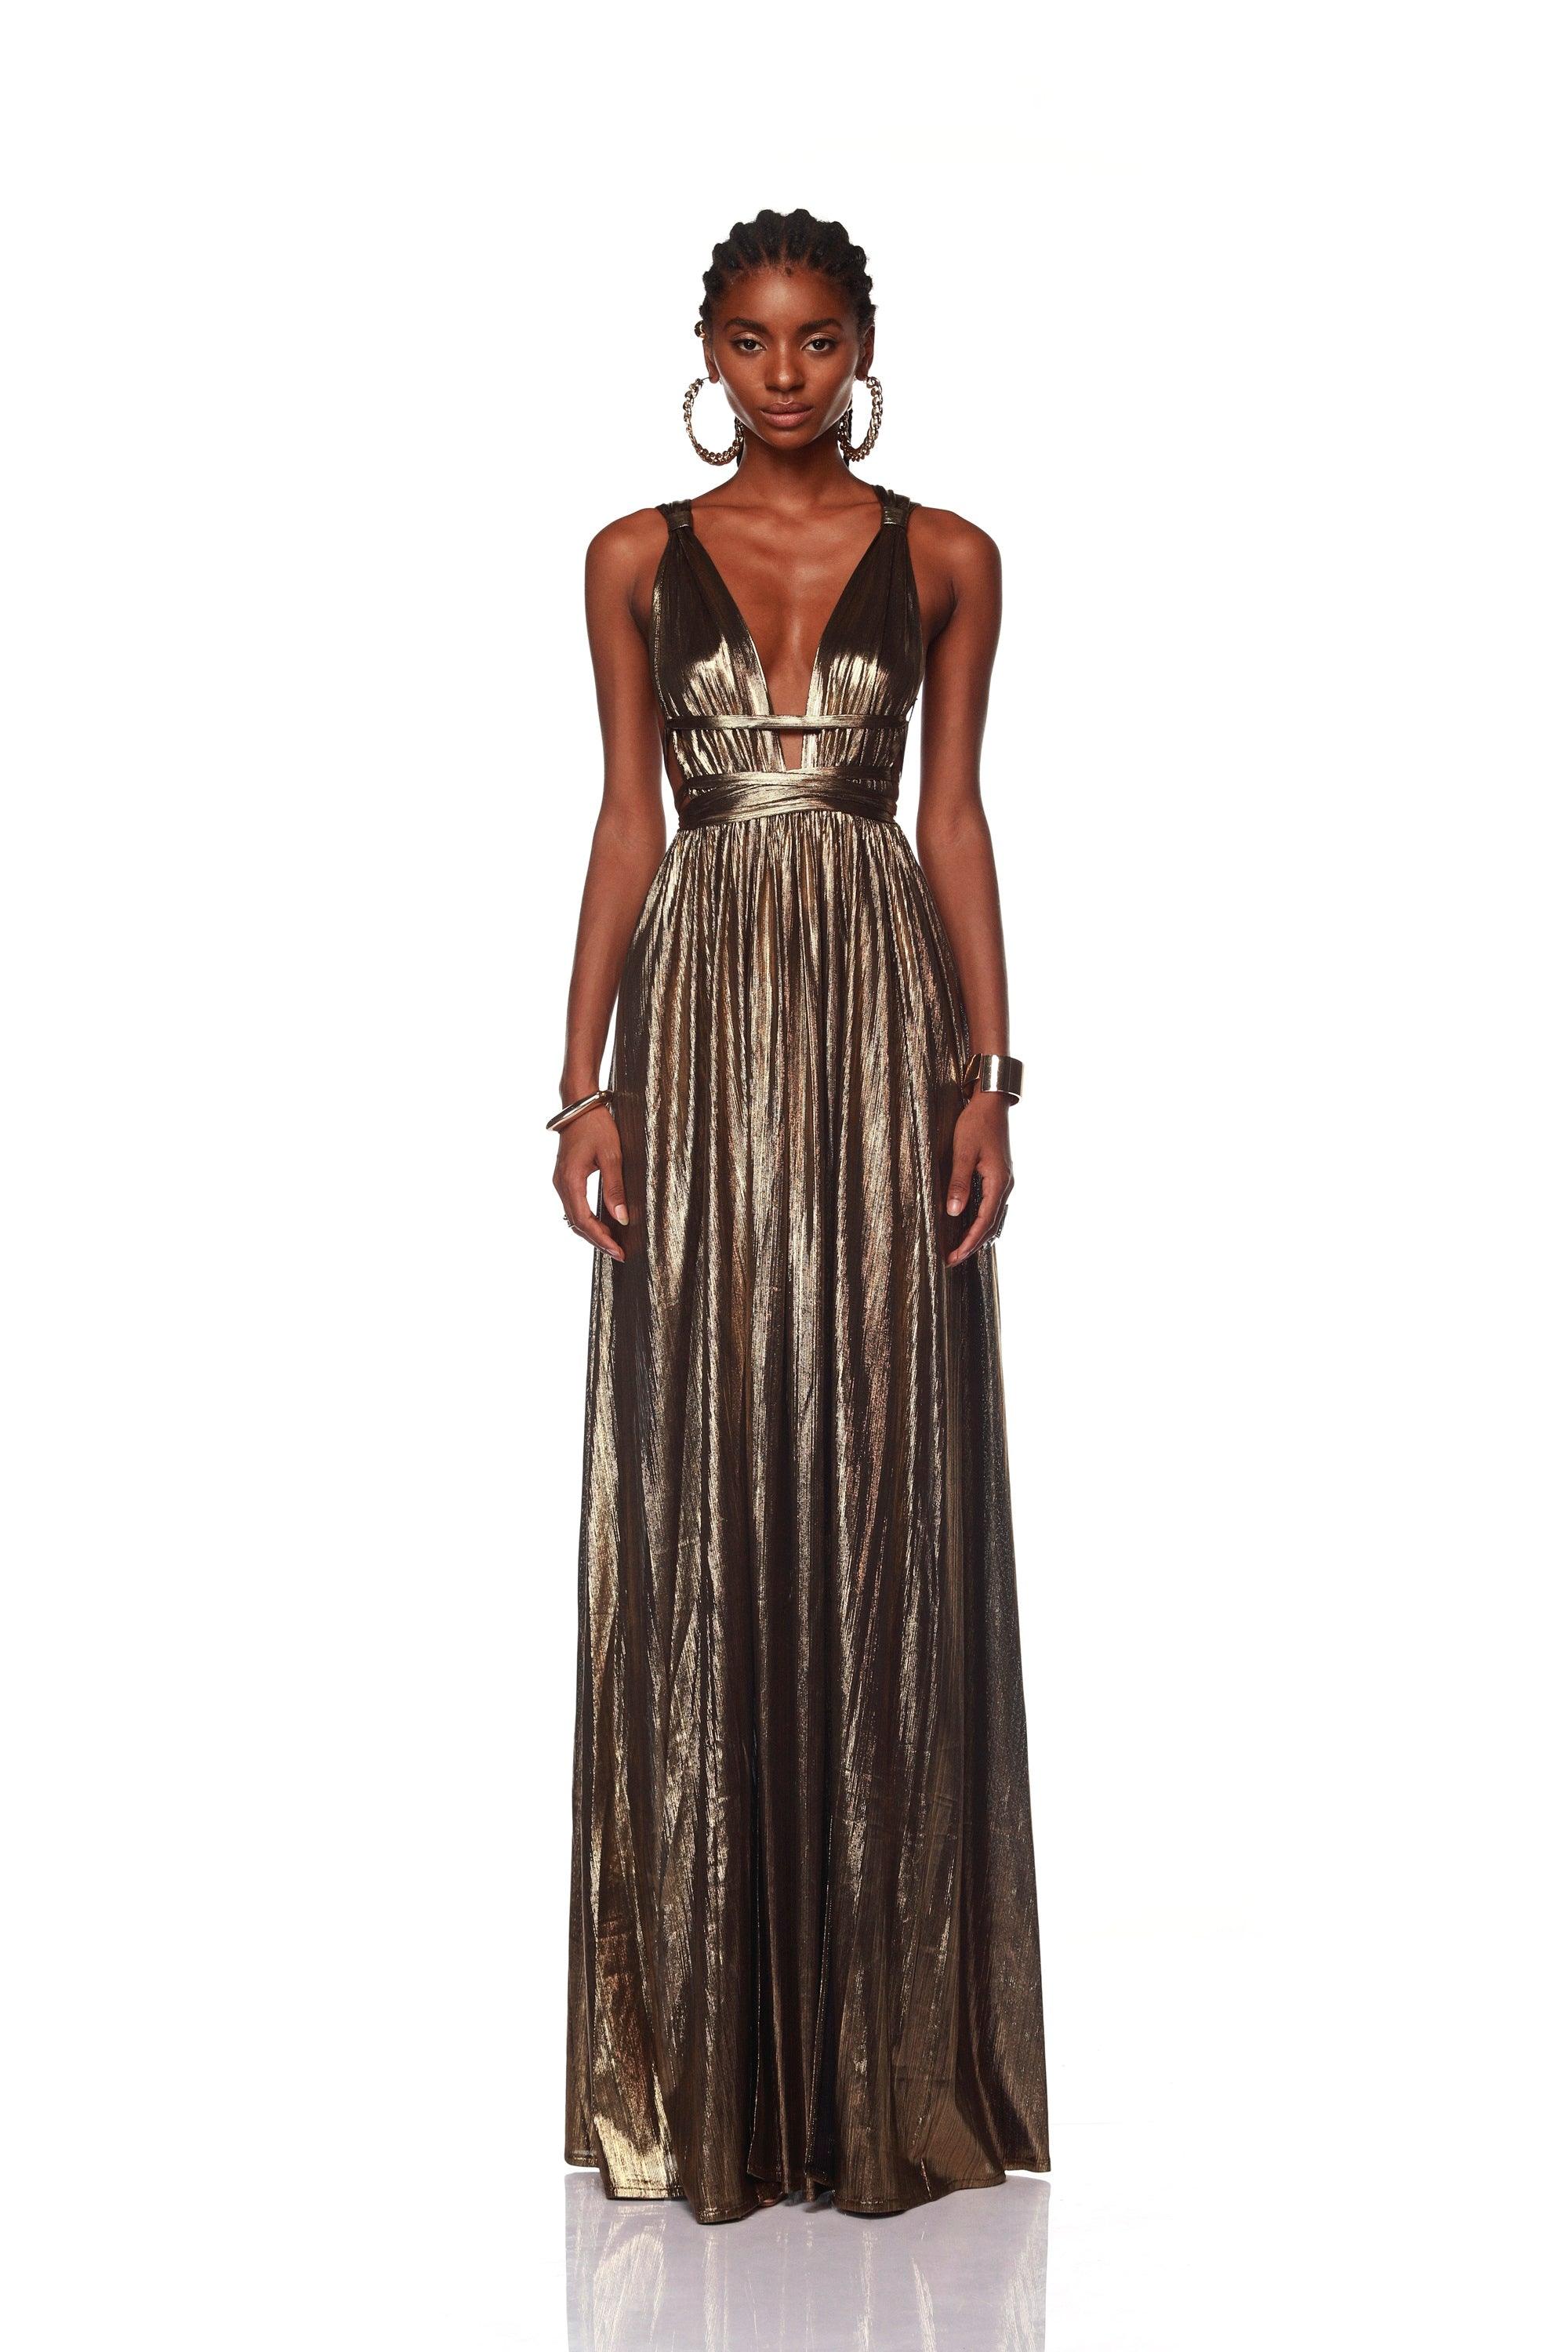 Buy Gold Nylon Flared Cocktail Gown () for N/A0.0 | Biba India